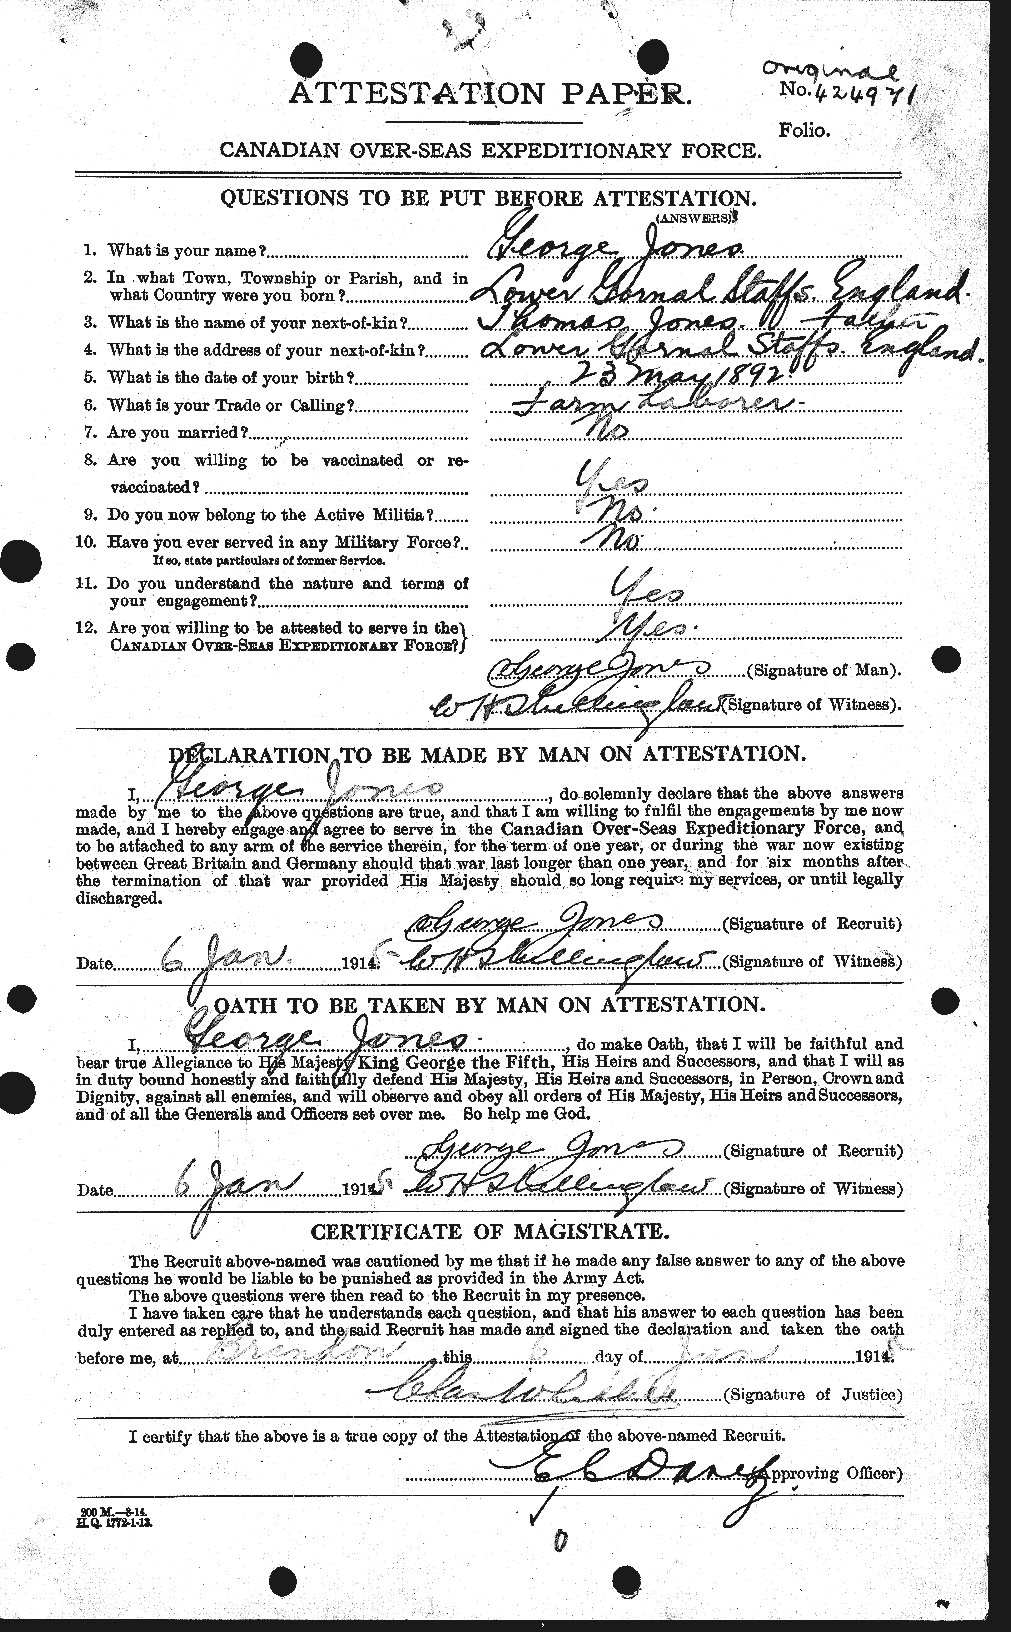 Personnel Records of the First World War - CEF 425198a